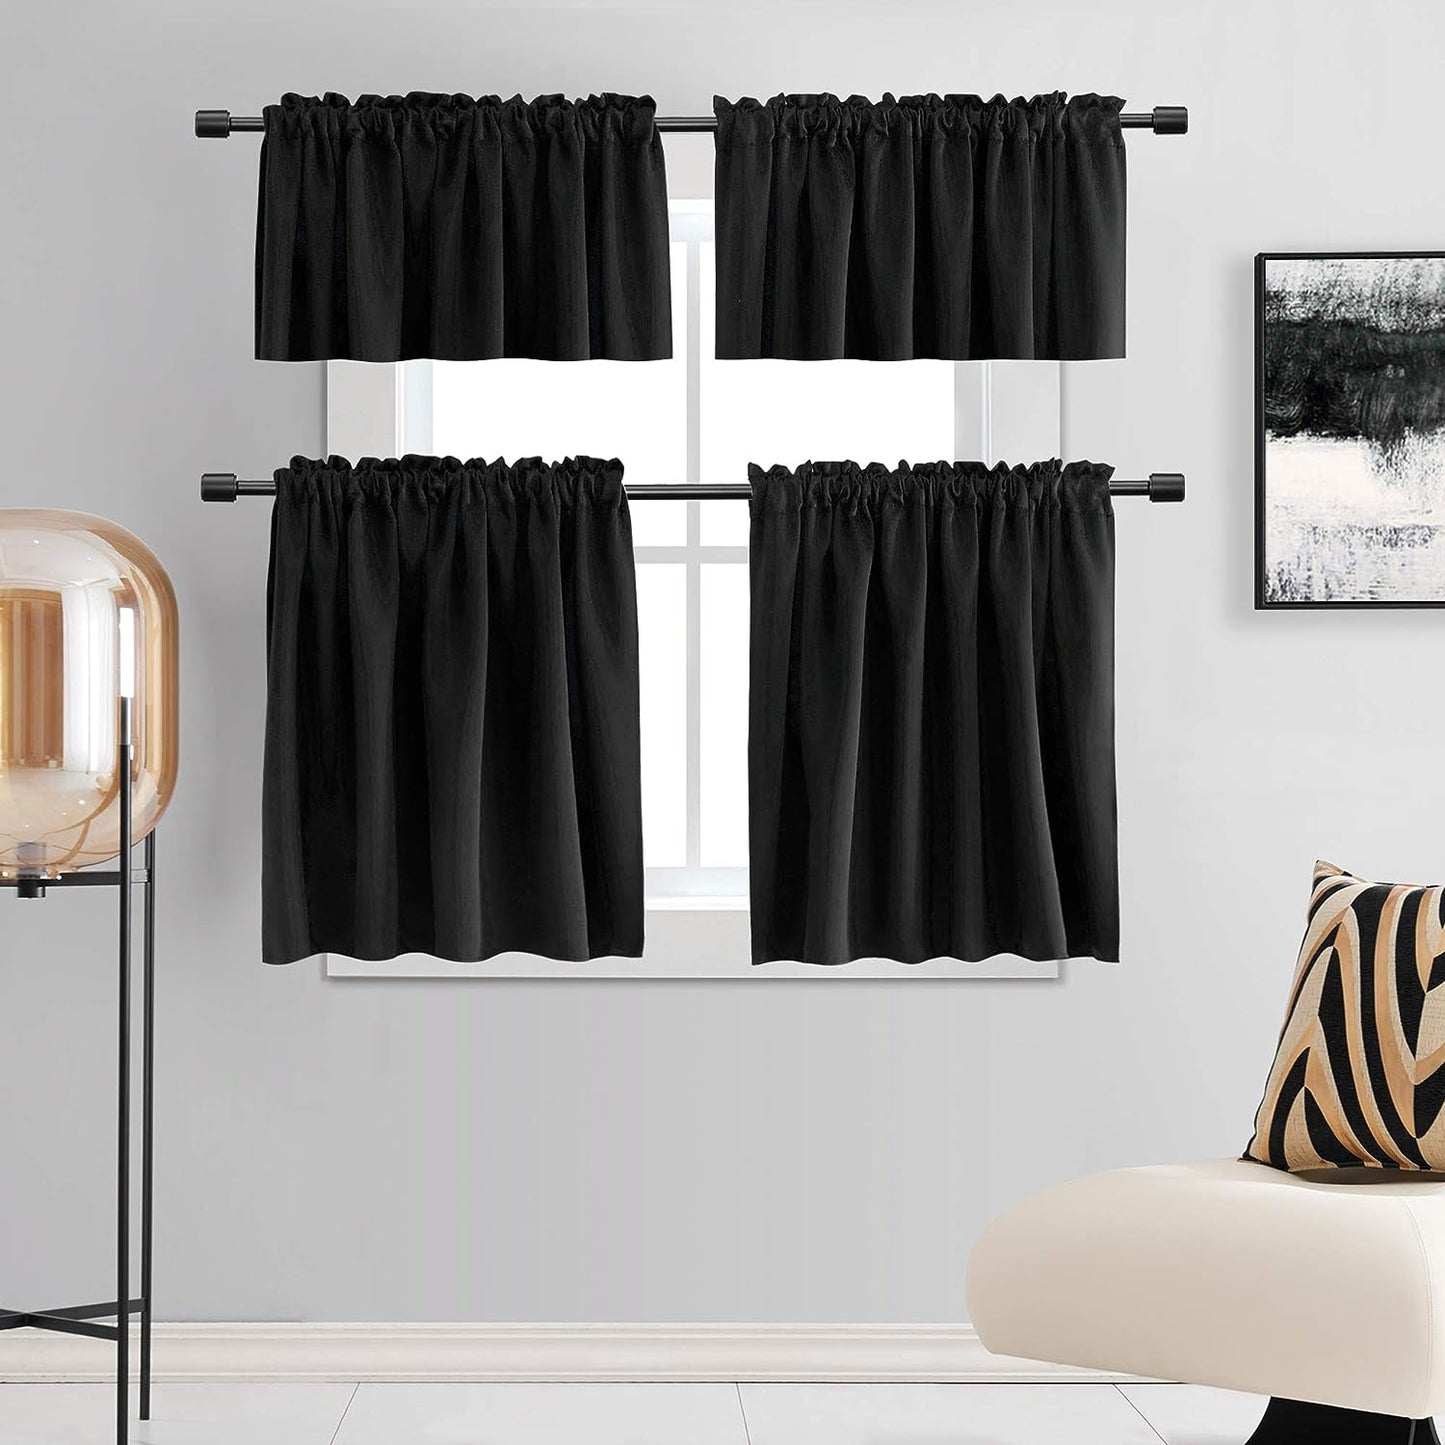 DONREN 24 Inch Length Curtains- 2 Panels Blackout Thermal Insulating Small Curtain Tiers for Bathroom with Rod Pocket (Black,42 Inch Width)  DONREN   